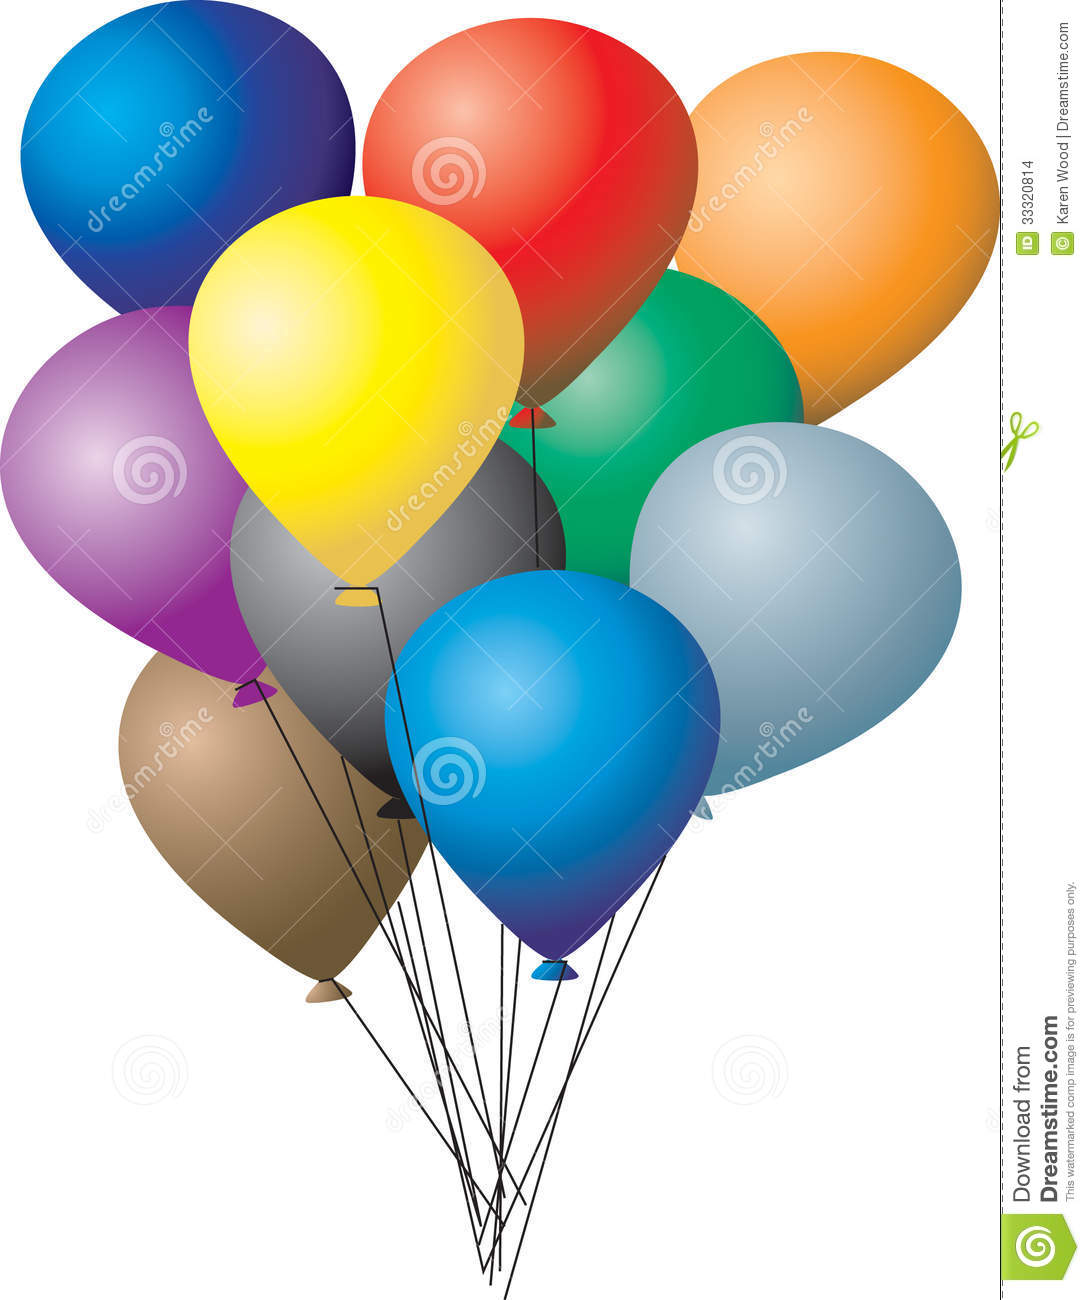 Group Of Balloons Stock Images   Image  33320814